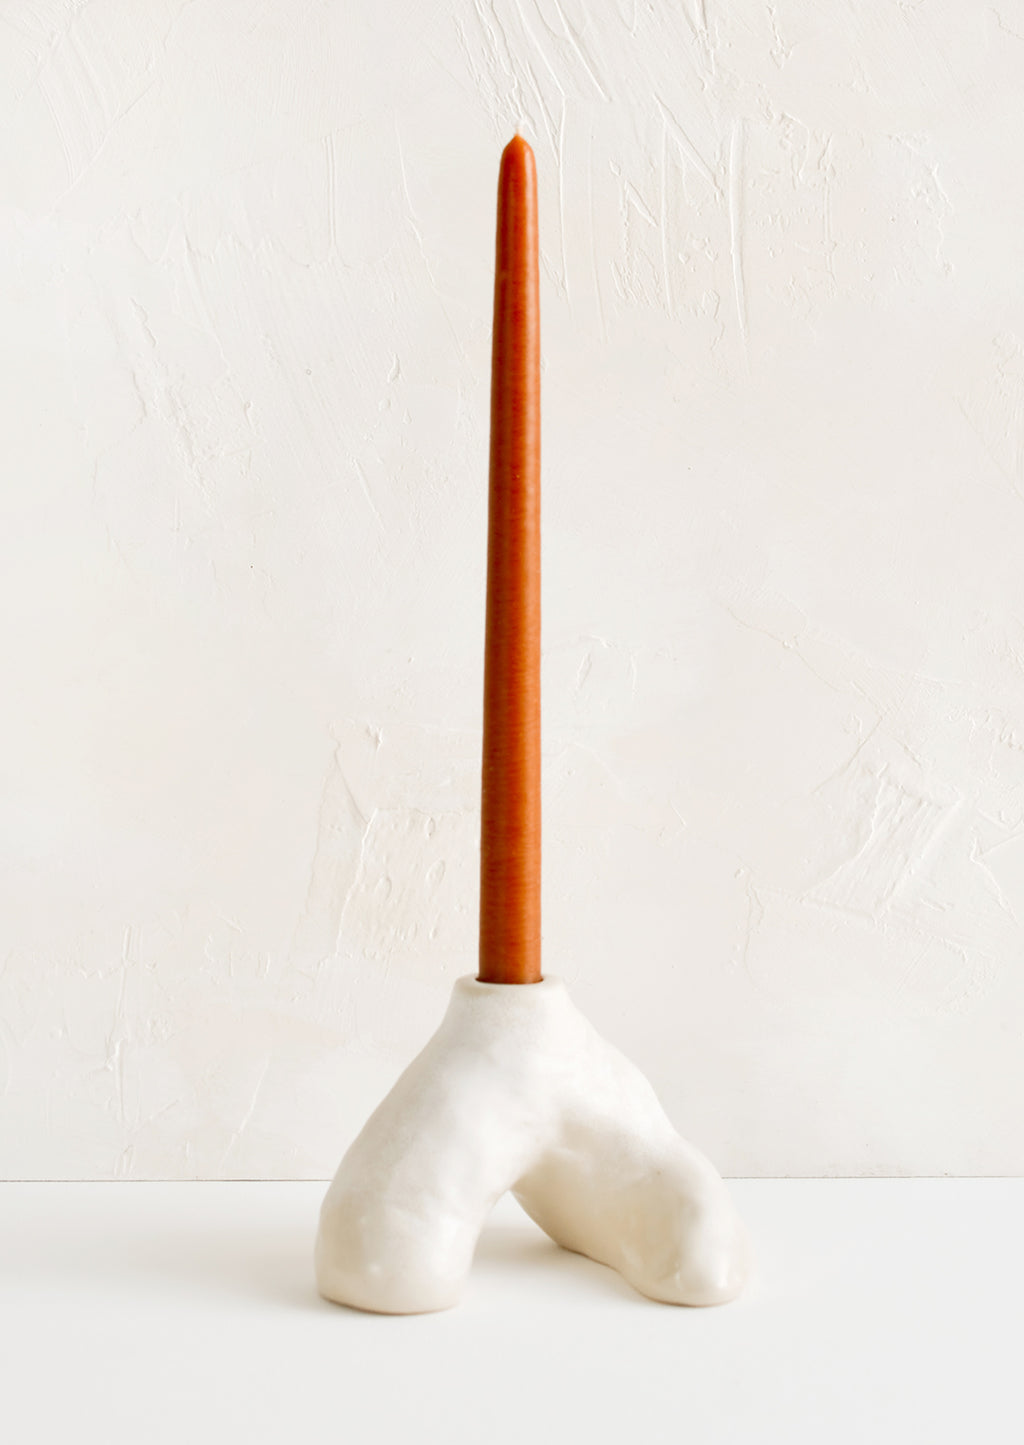 3: A ceramic taper holder in barnacle-like shape with rust colored taper candle.